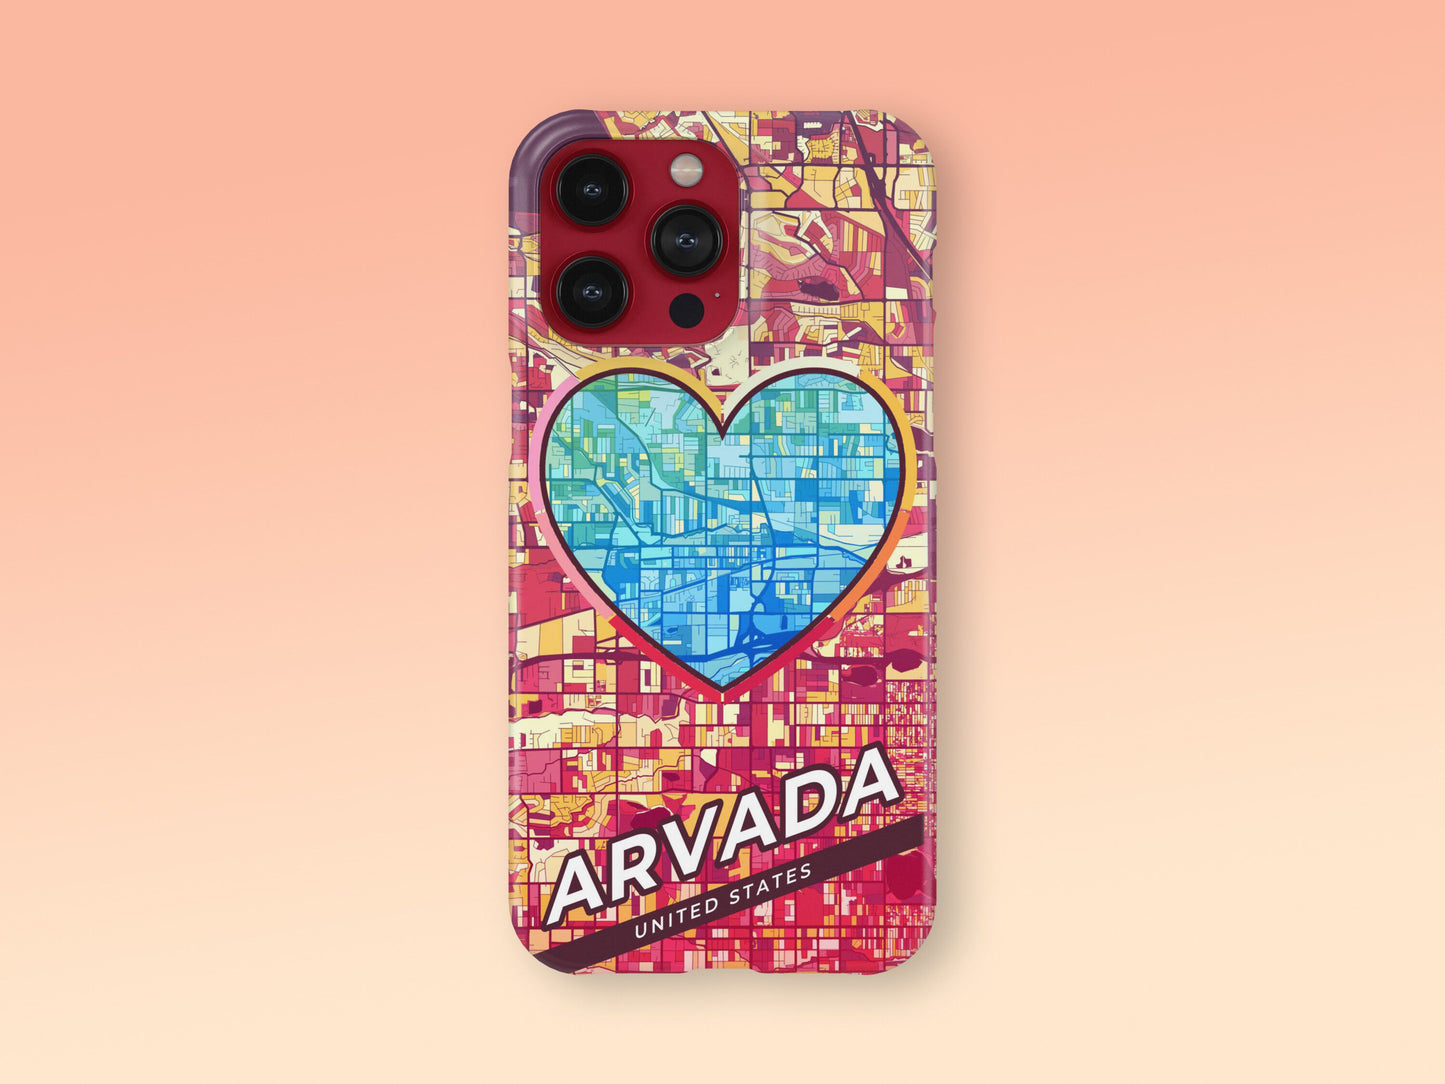 Arvada Colorado slim phone case with colorful icon. Birthday, wedding or housewarming gift. Couple match cases. 2